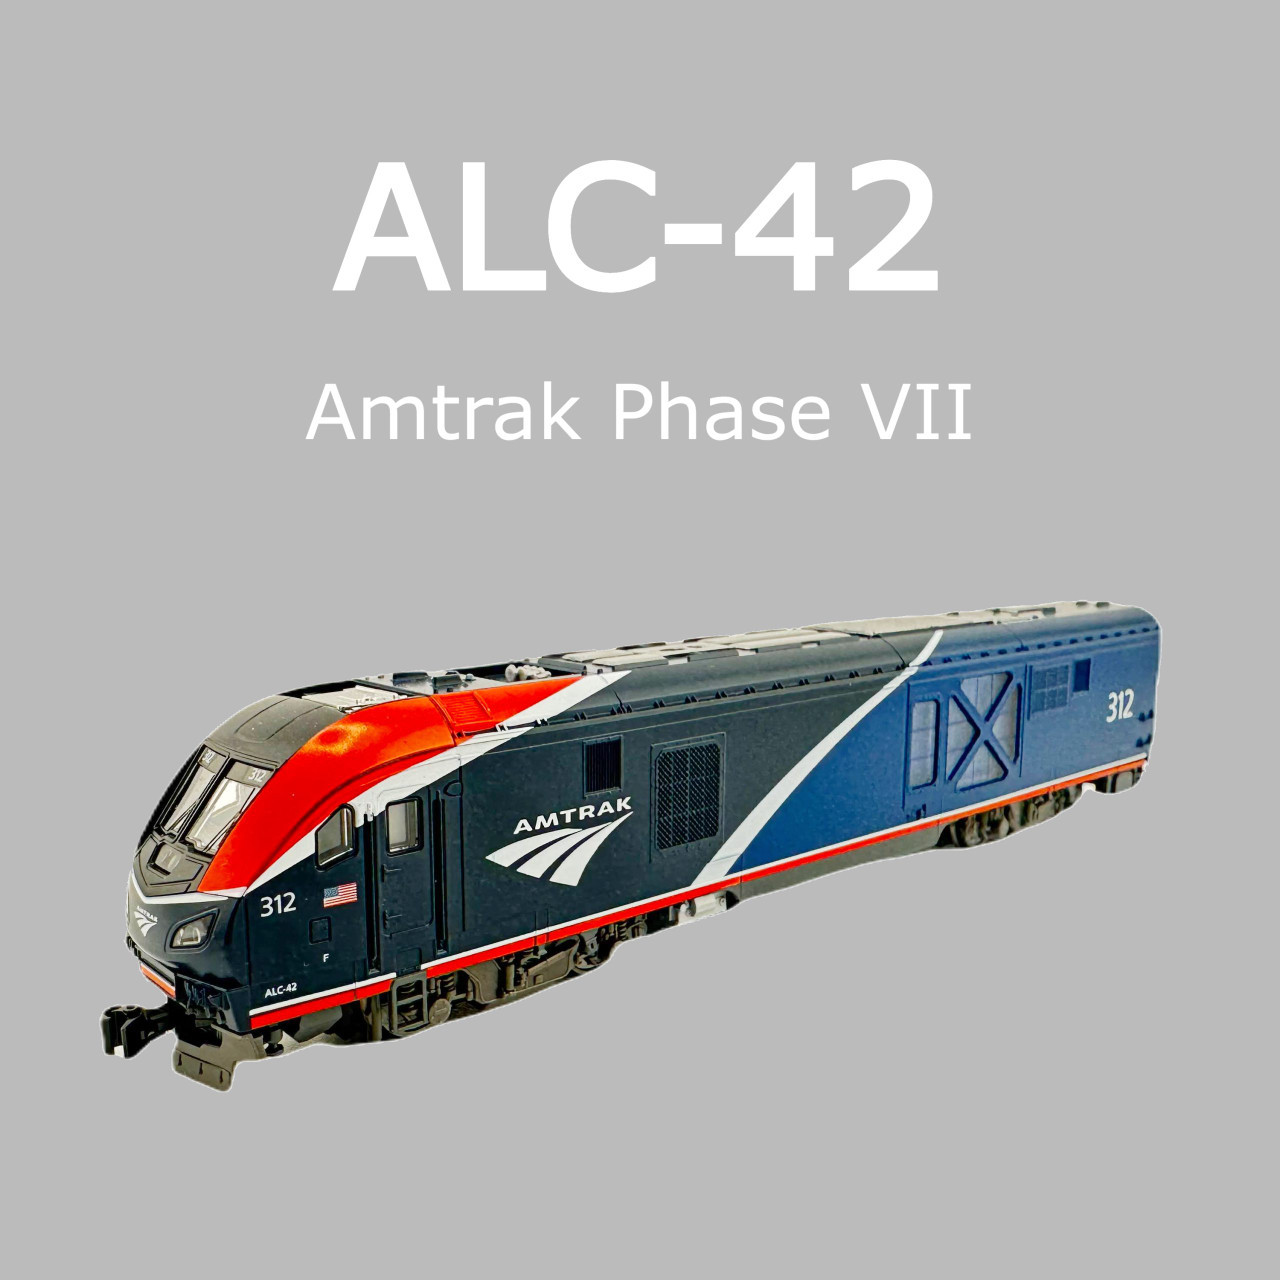 Kato 176 6056-DCC N ALC-42 Charger Amtrak Phase VII #315 w/Pre-Installed DCC